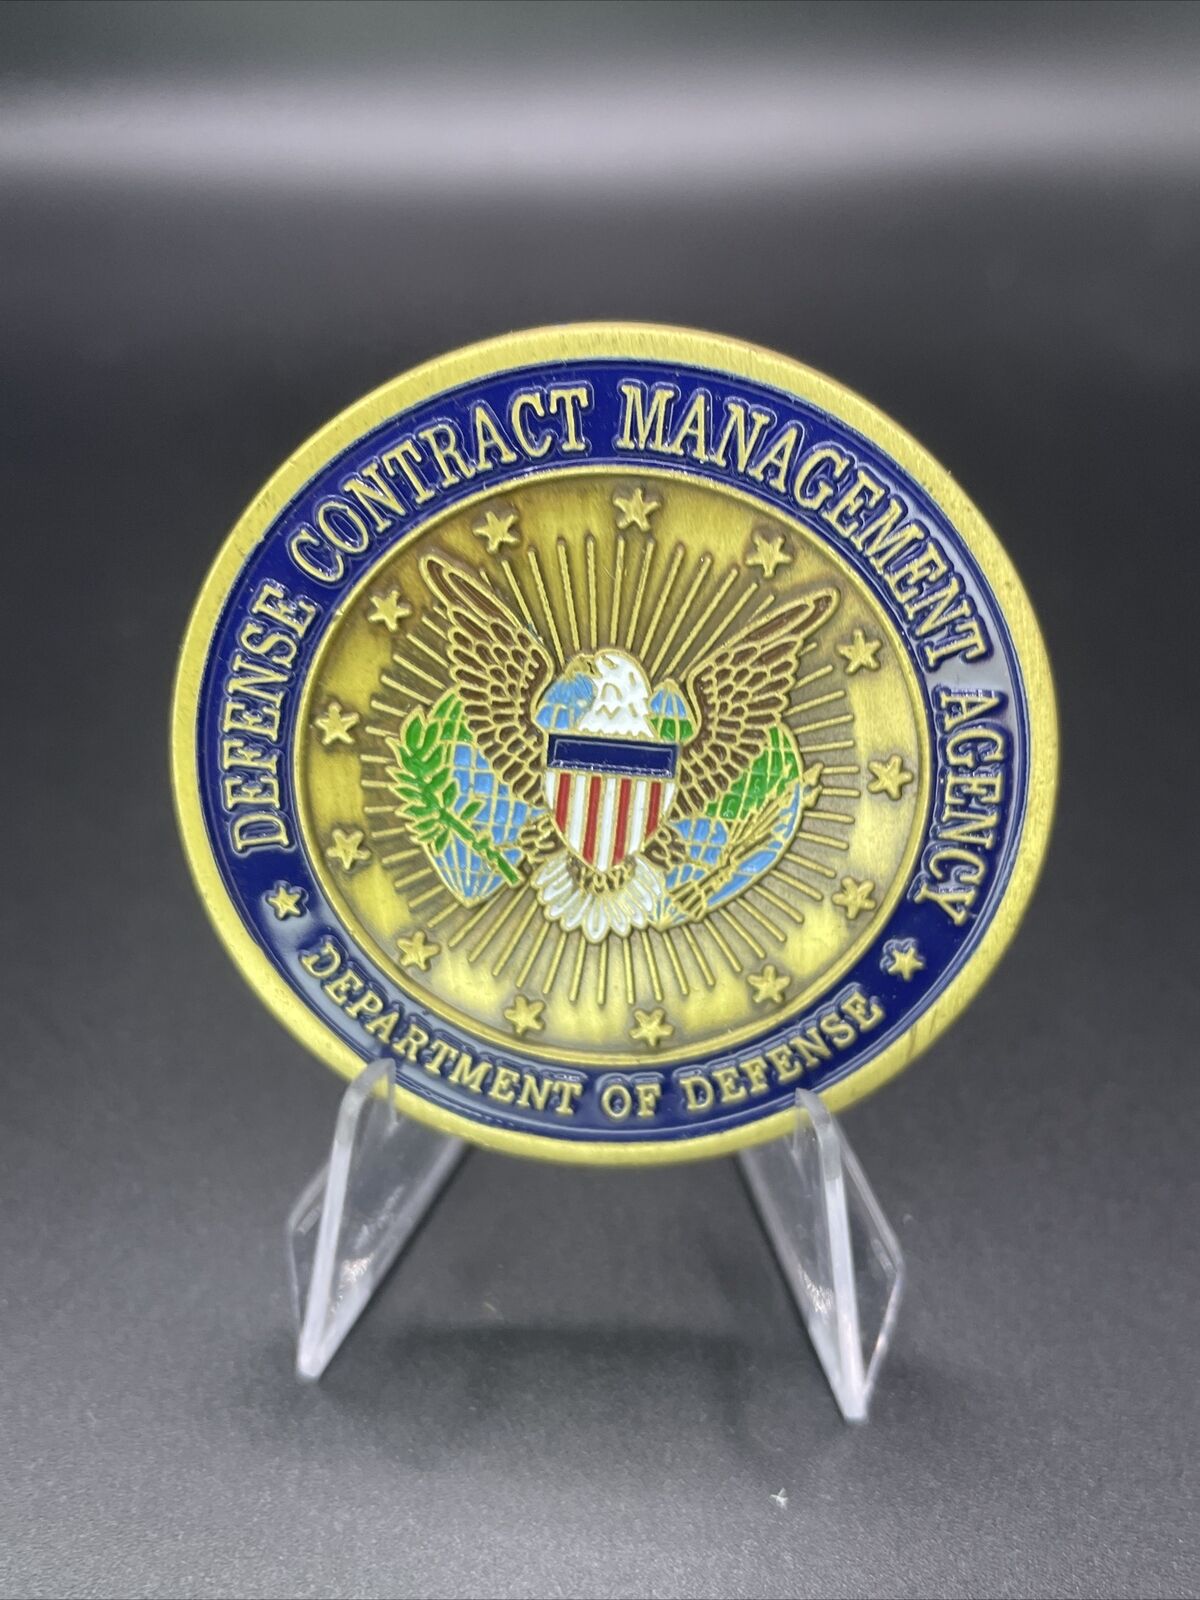 Defense contract management agency Challenge Coin, Van Nuys